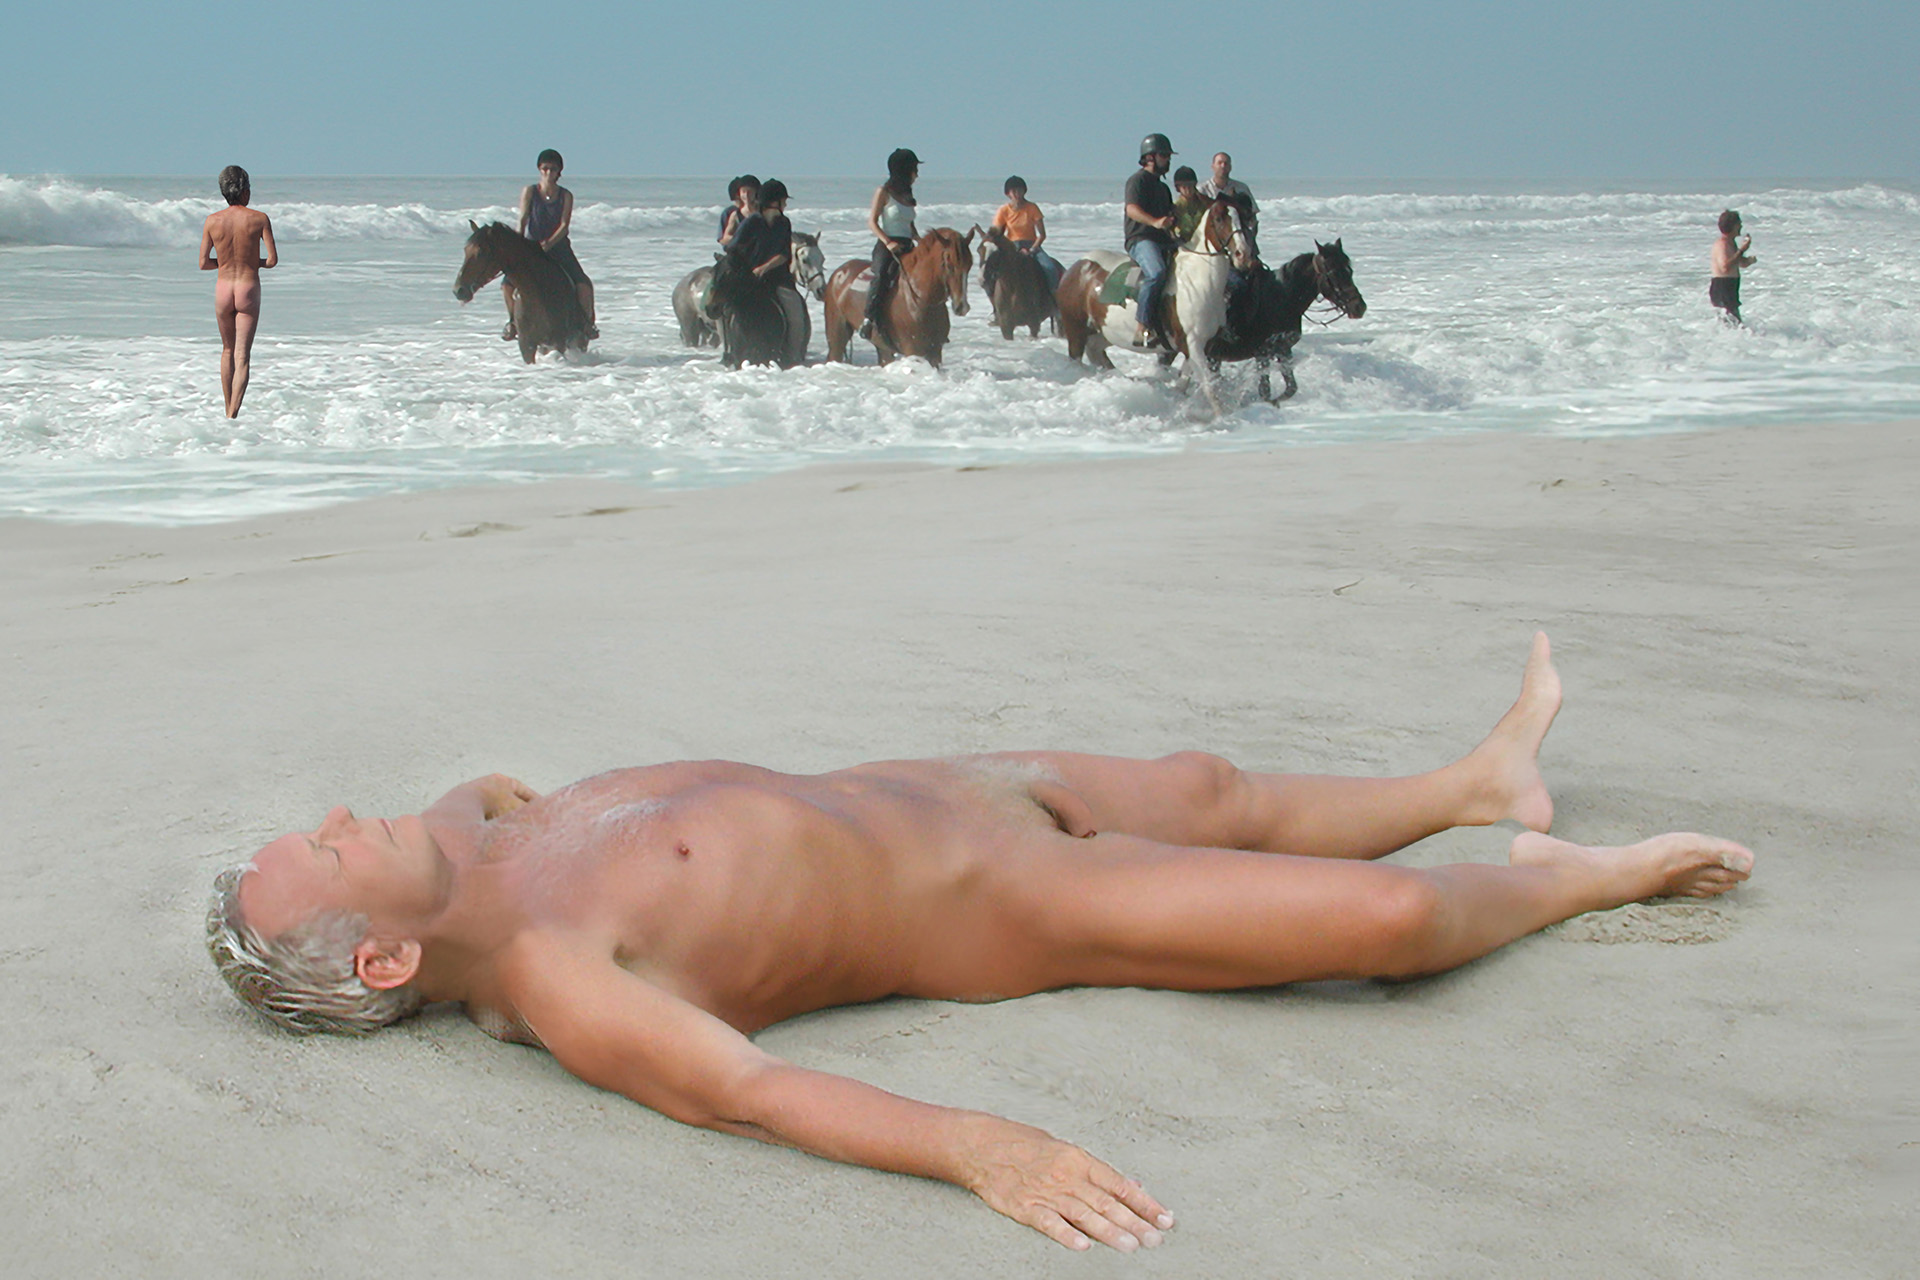 Nudism - nude sunbathing on the Atlantic Ocean in the great outdoors - Centre Hélio Marin Montalivet